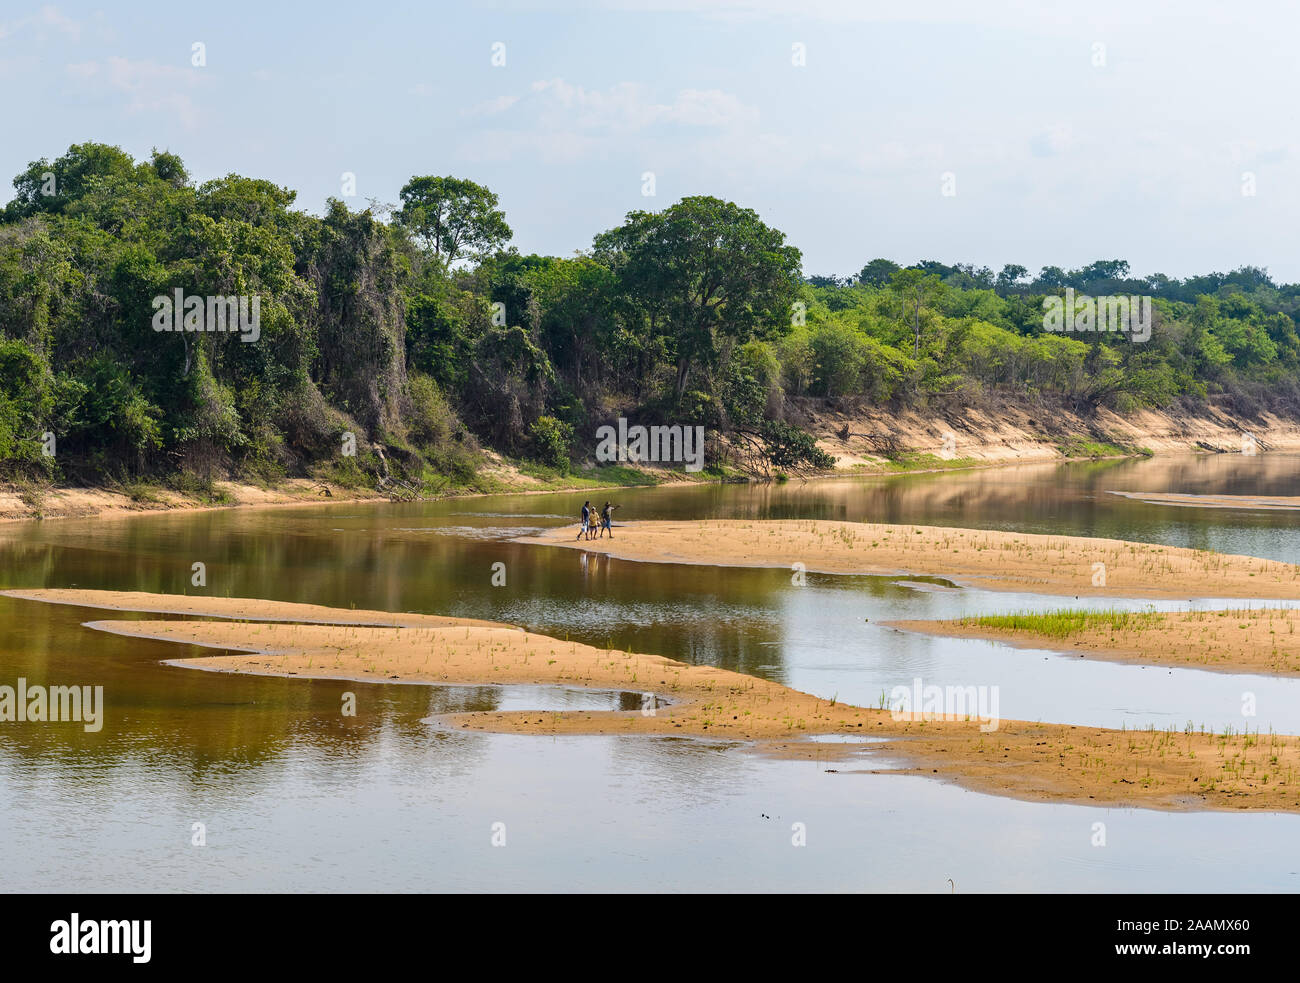 Local villagers walk on the sandbars in Rio Araguaia, a major tributary in the Amazon Basin. Tocantins, Brazil, South America. Stock Photo